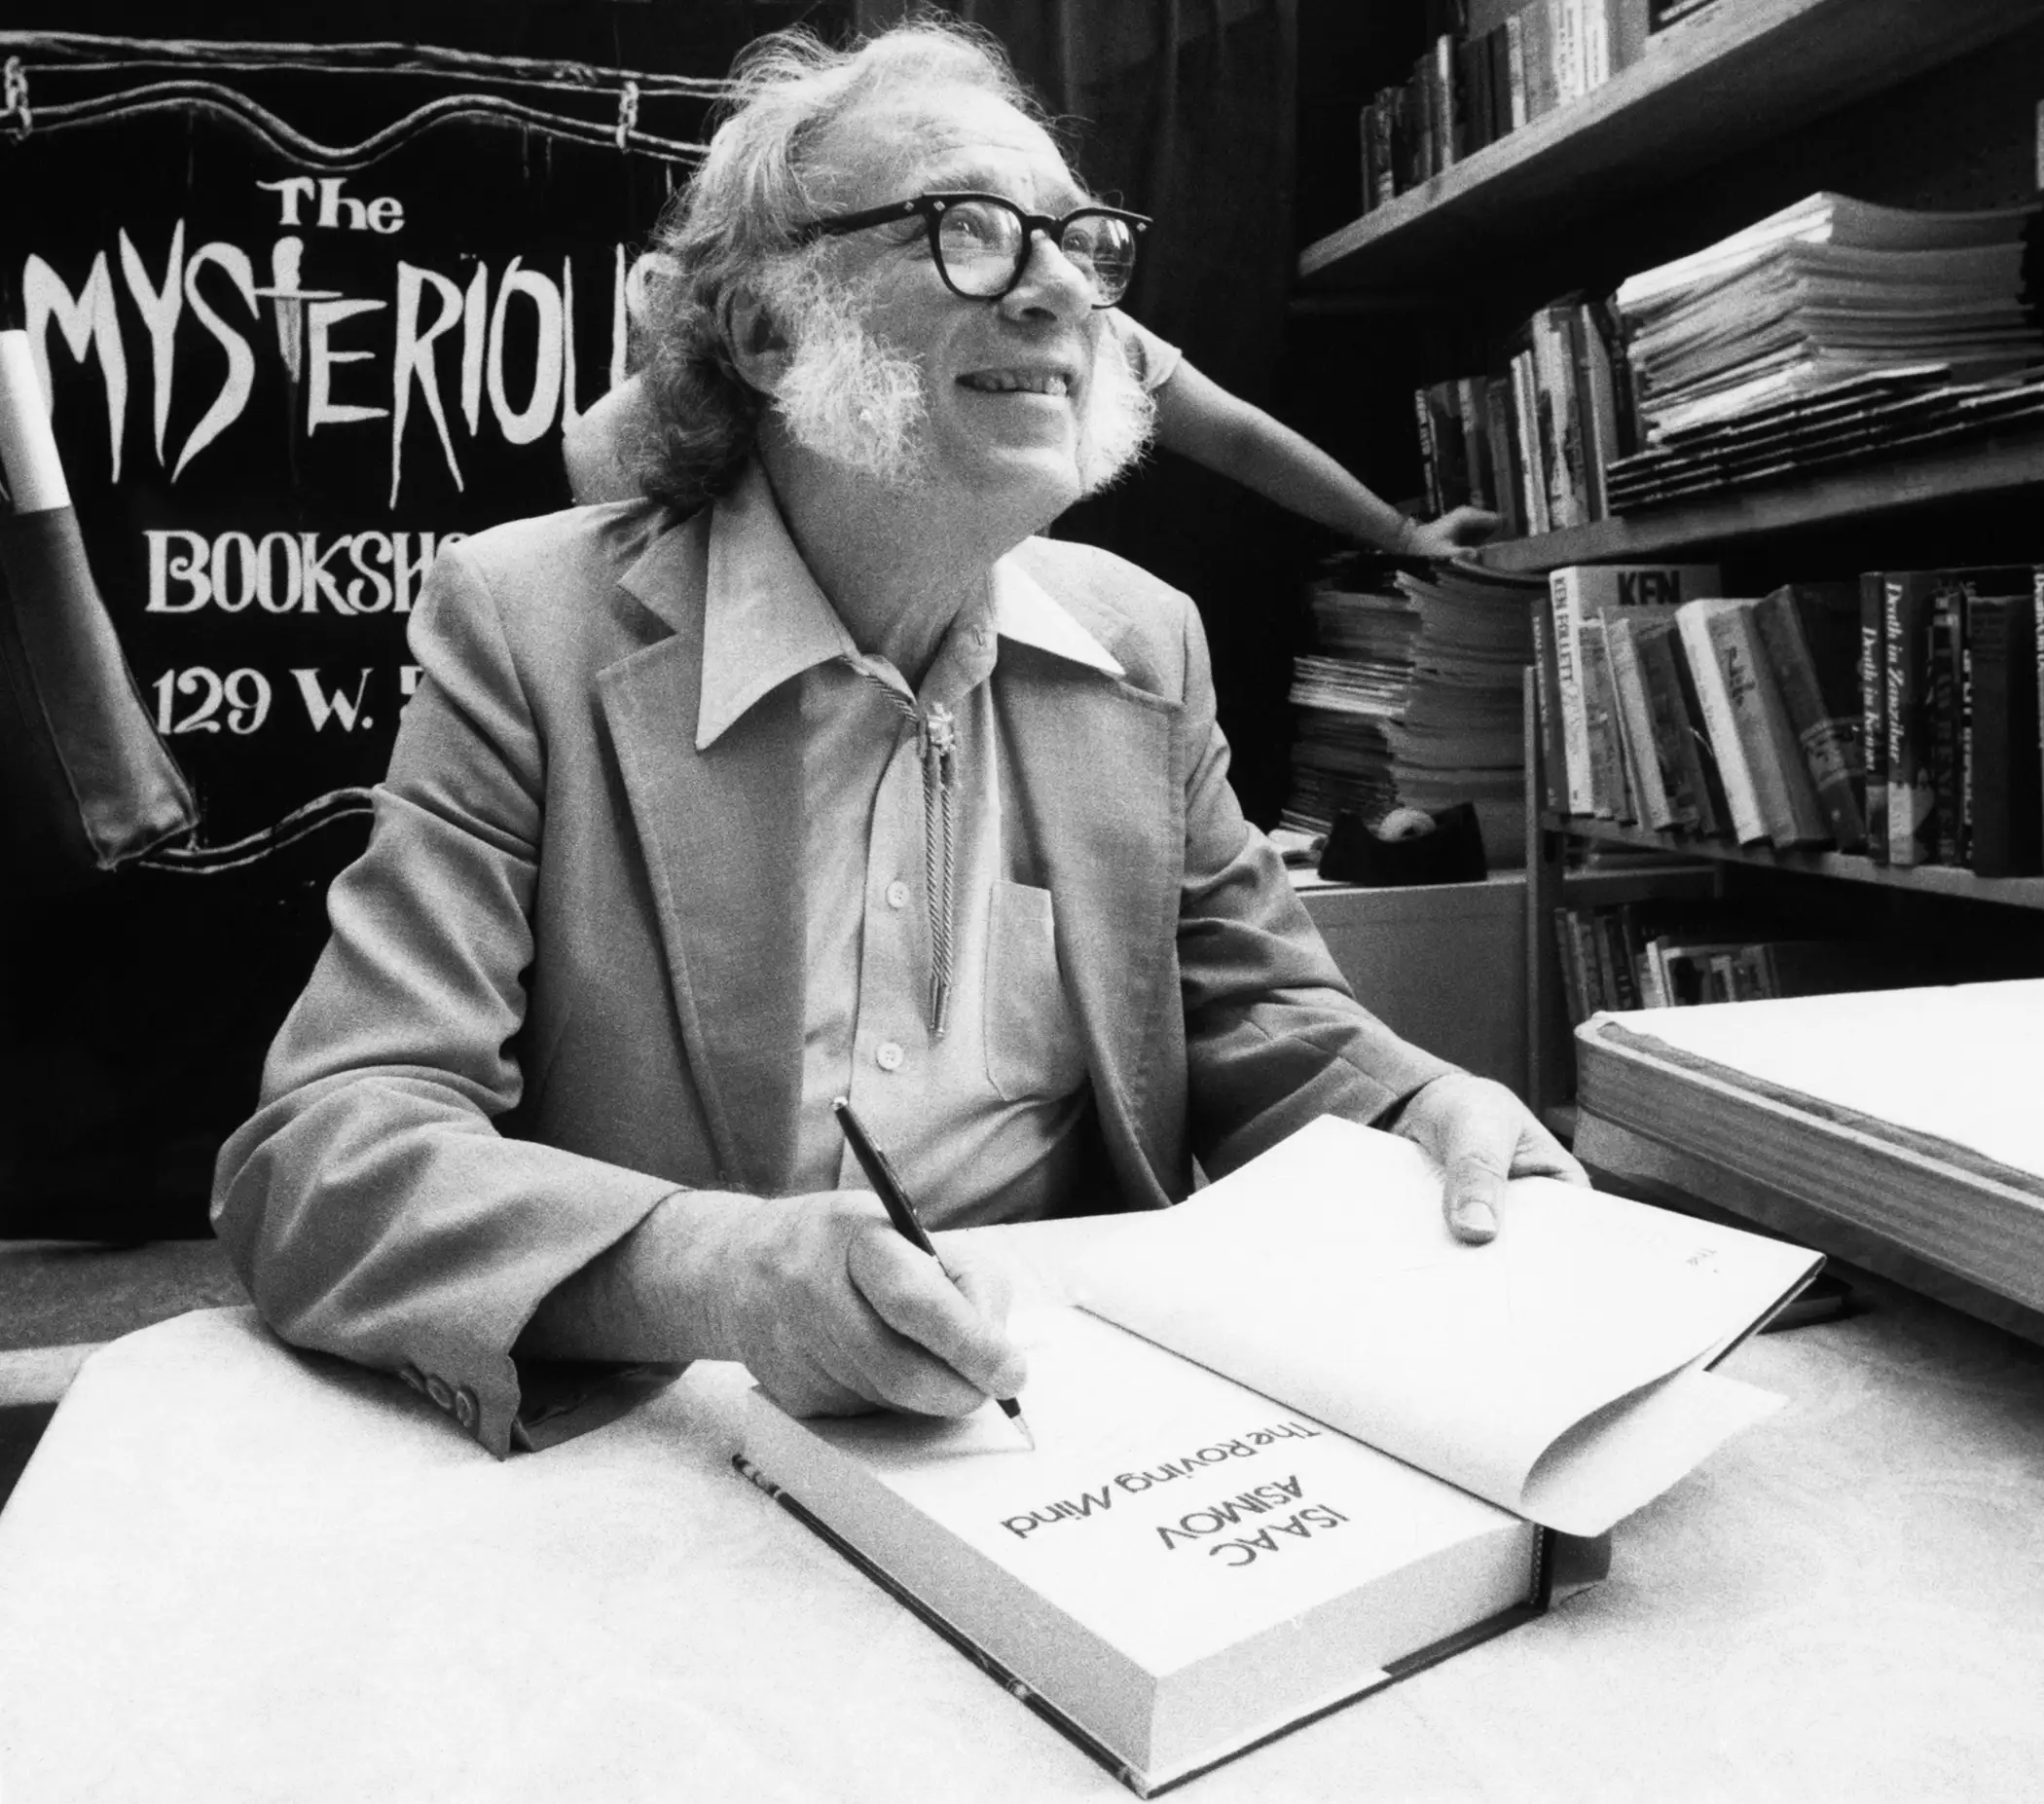 Author Isaac Asimov autographs books at the Mysterious Book Store stall on February 2, 1984 during the Fifth Avenue Book Fair held in New York City, United States.